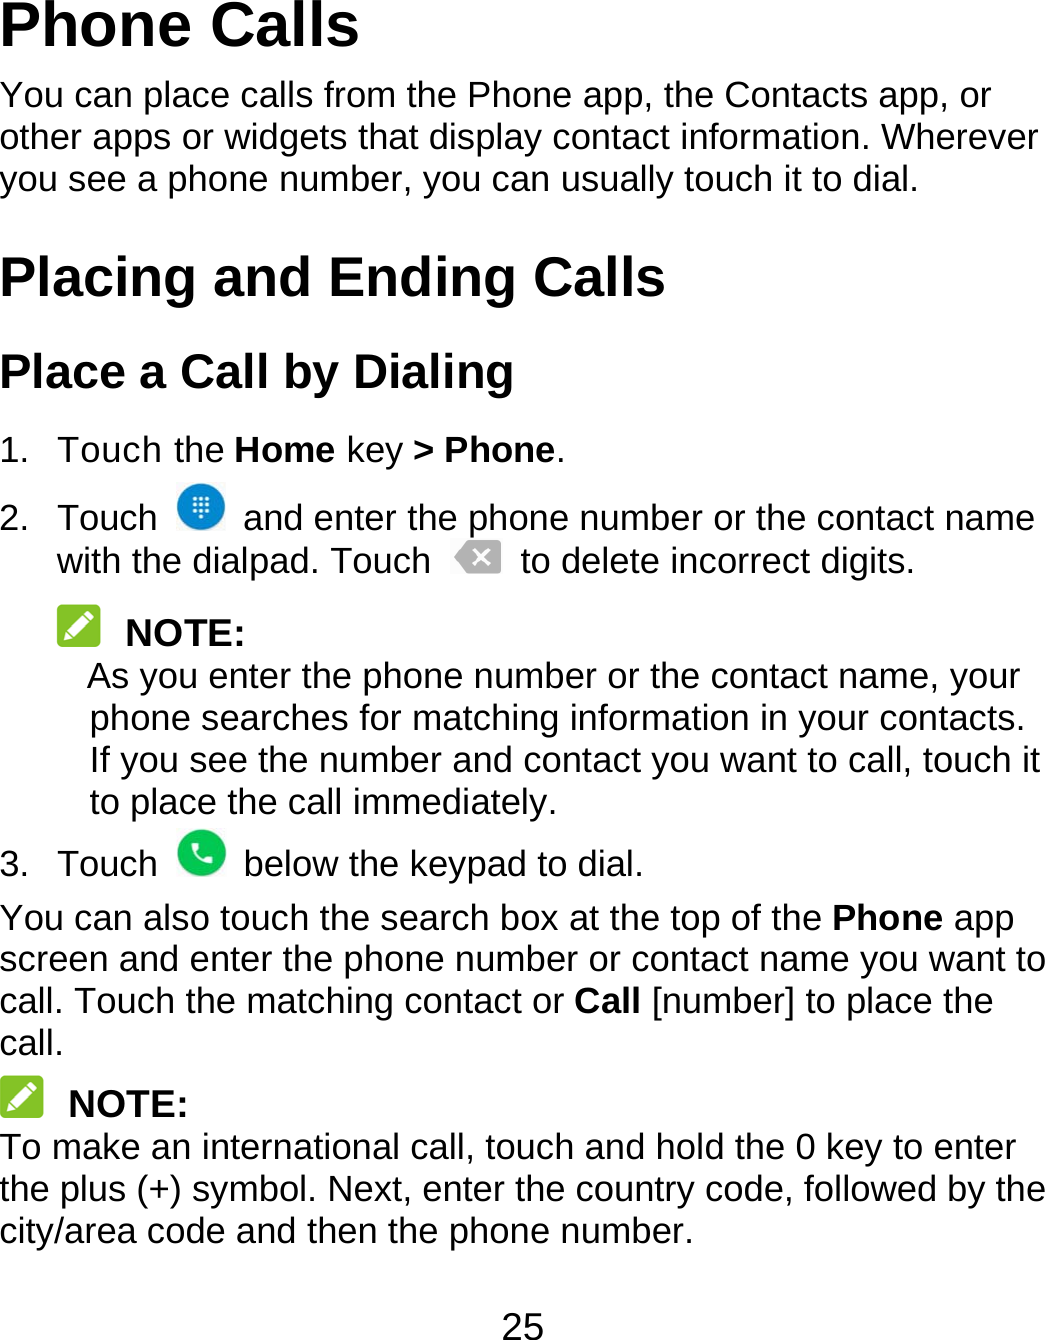 25 Phone Calls You can place calls from the Phone app, the Contacts app, or other apps or widgets that display contact information. Wherever you see a phone number, you can usually touch it to dial. Placing and Ending Calls Place a Call by Dialing 1. Touch the Home key &gt; Phone. 2. Touch    and enter the phone number or the contact name with the dialpad. Touch    to delete incorrect digits.  NOTE: As you enter the phone number or the contact name, your phone searches for matching information in your contacts. If you see the number and contact you want to call, touch it to place the call immediately. 3. Touch    below the keypad to dial. You can also touch the search box at the top of the Phone app screen and enter the phone number or contact name you want to call. Touch the matching contact or Call [number] to place the call.  NOTE: To make an international call, touch and hold the 0 key to enter the plus (+) symbol. Next, enter the country code, followed by the city/area code and then the phone number. 